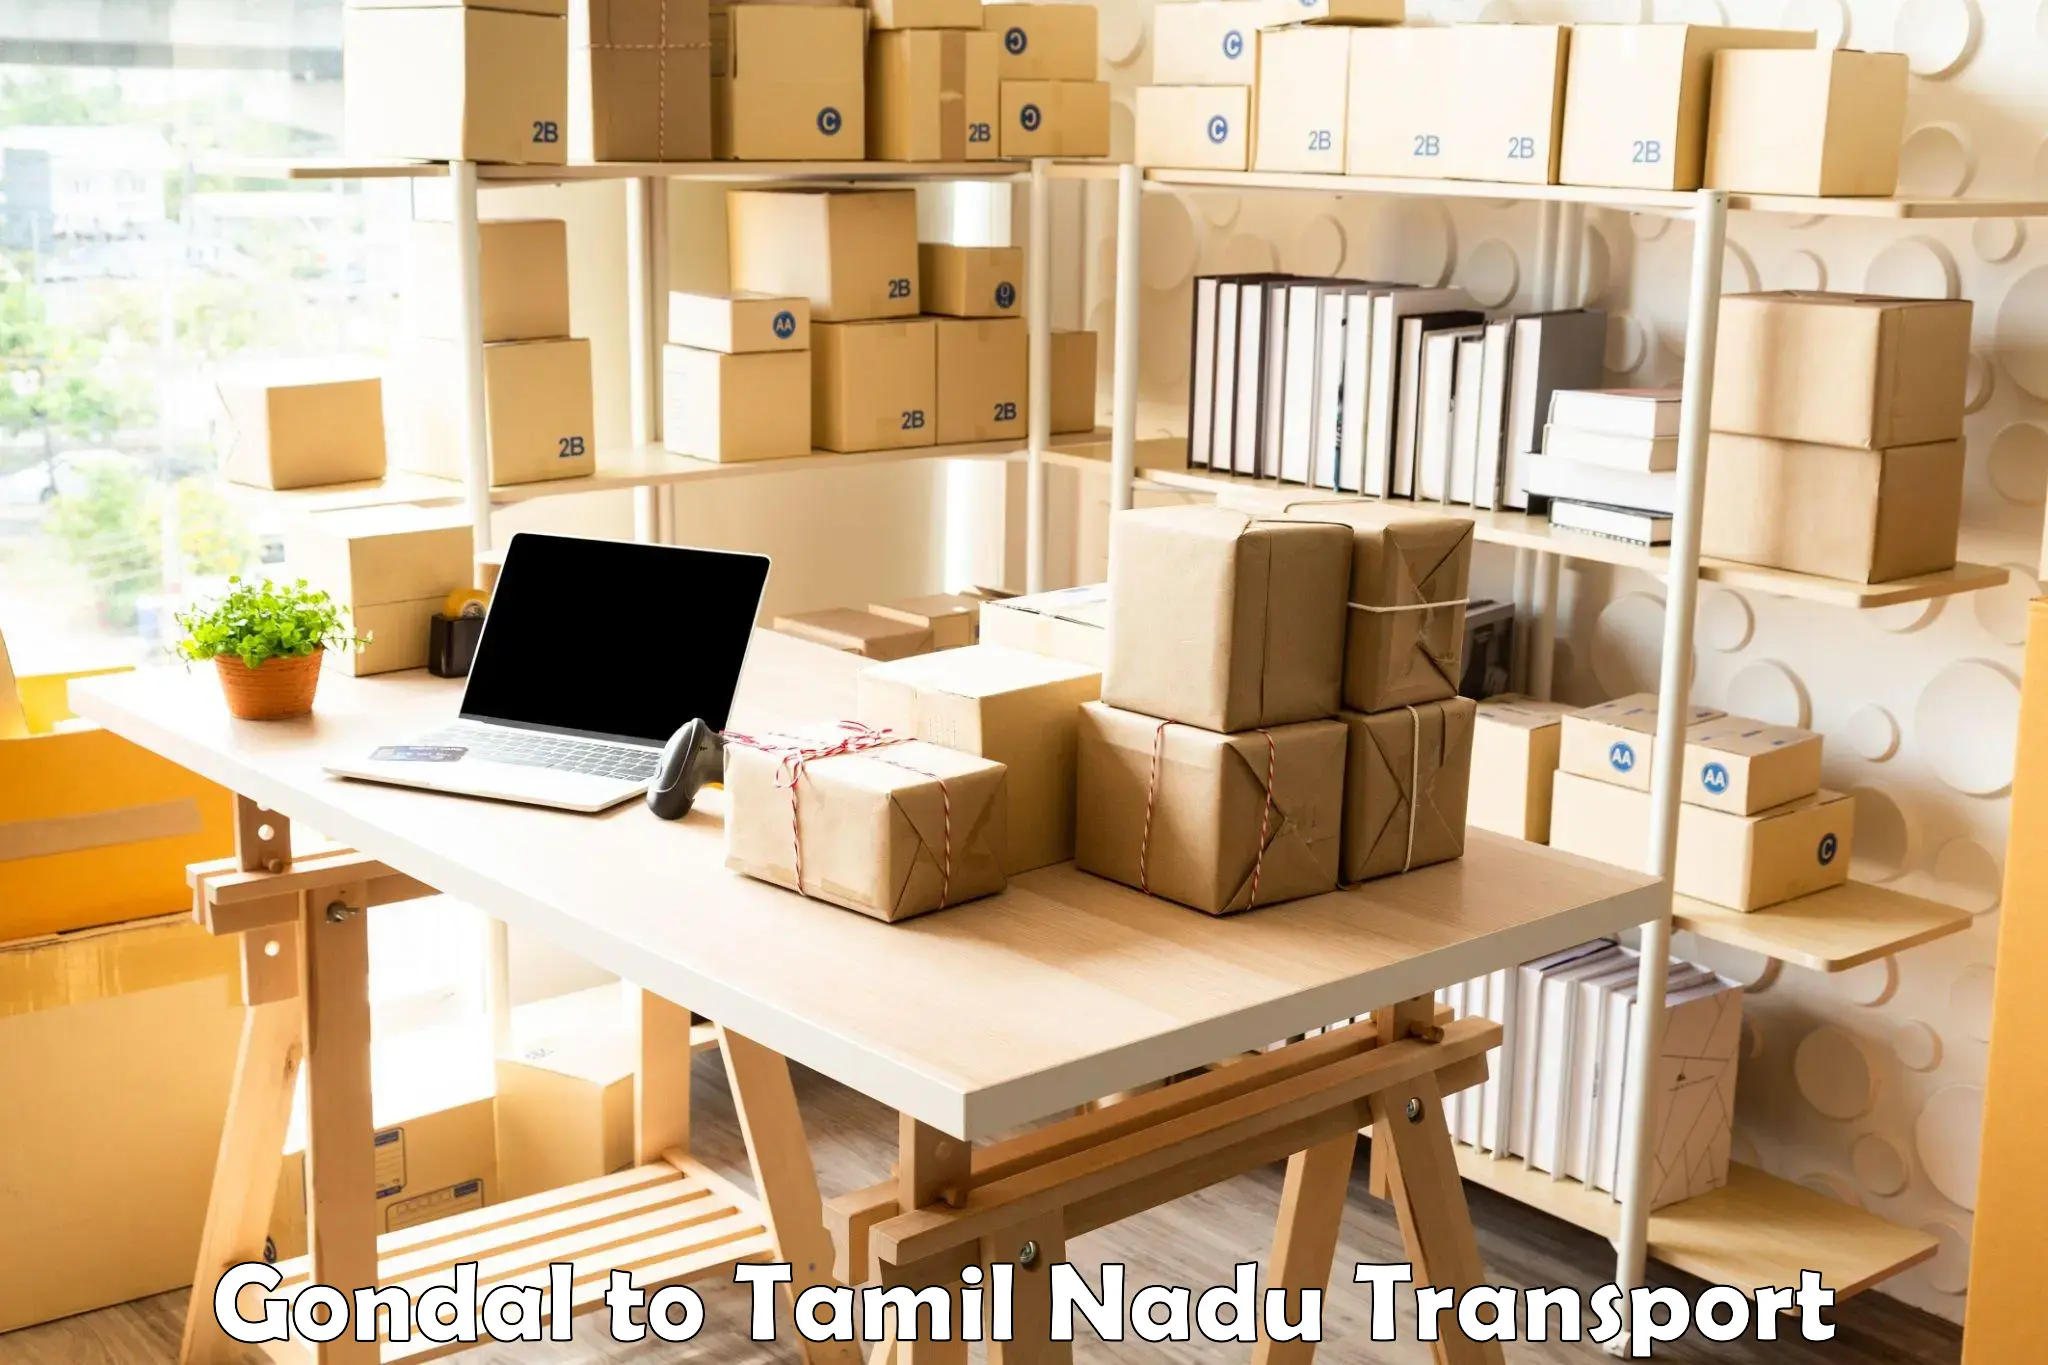 Goods delivery service Gondal to Perambur